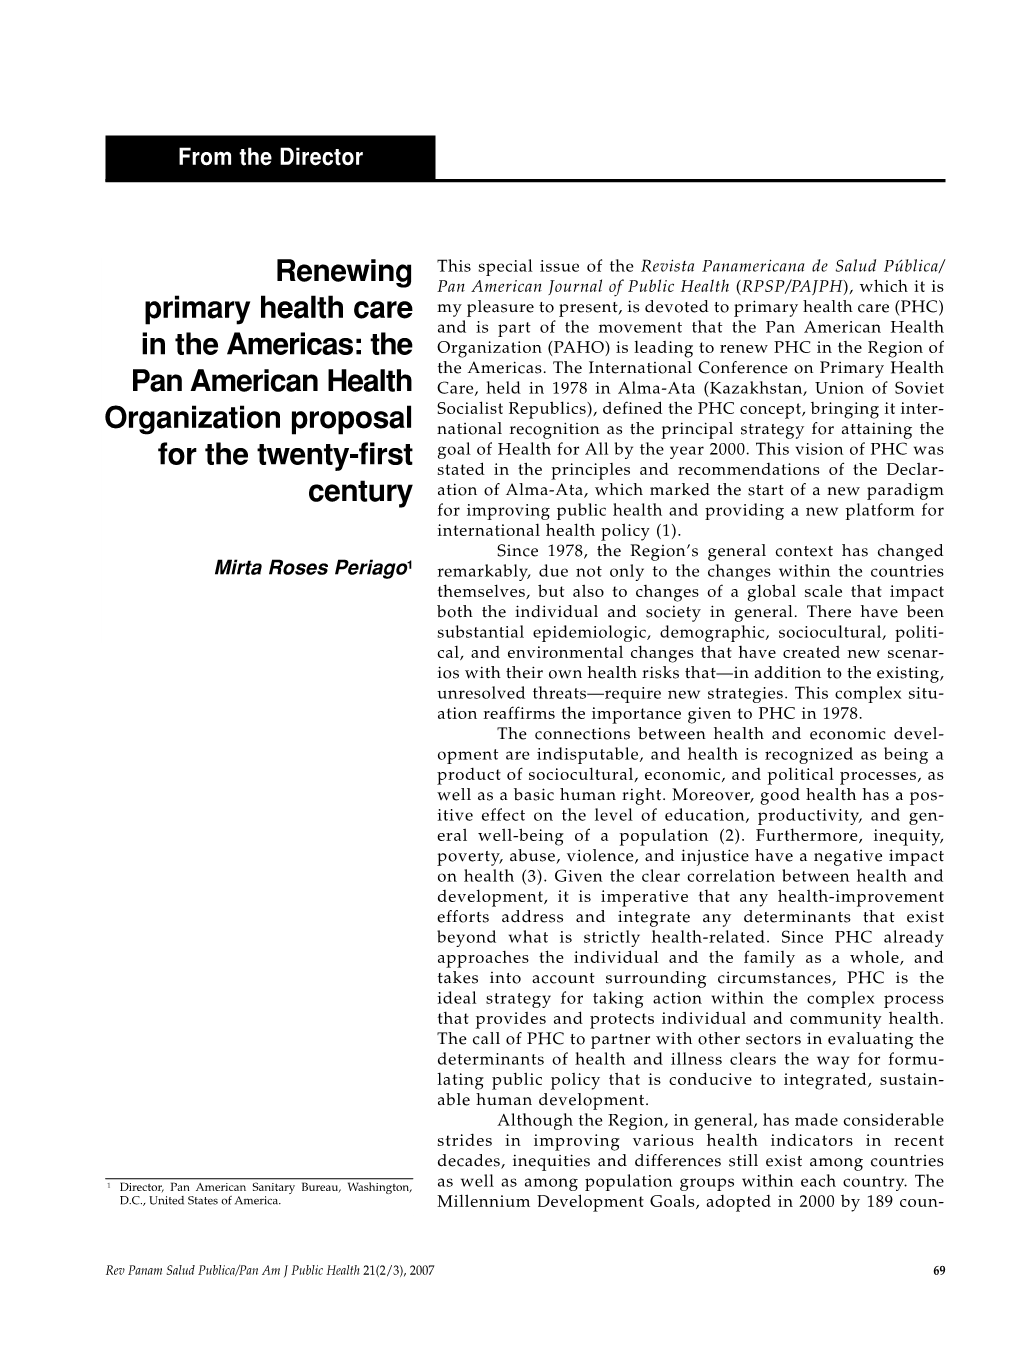 Renewing Primary Health Care in the Americas: the Pan American Health Organization Proposal for the Twenty-First Century